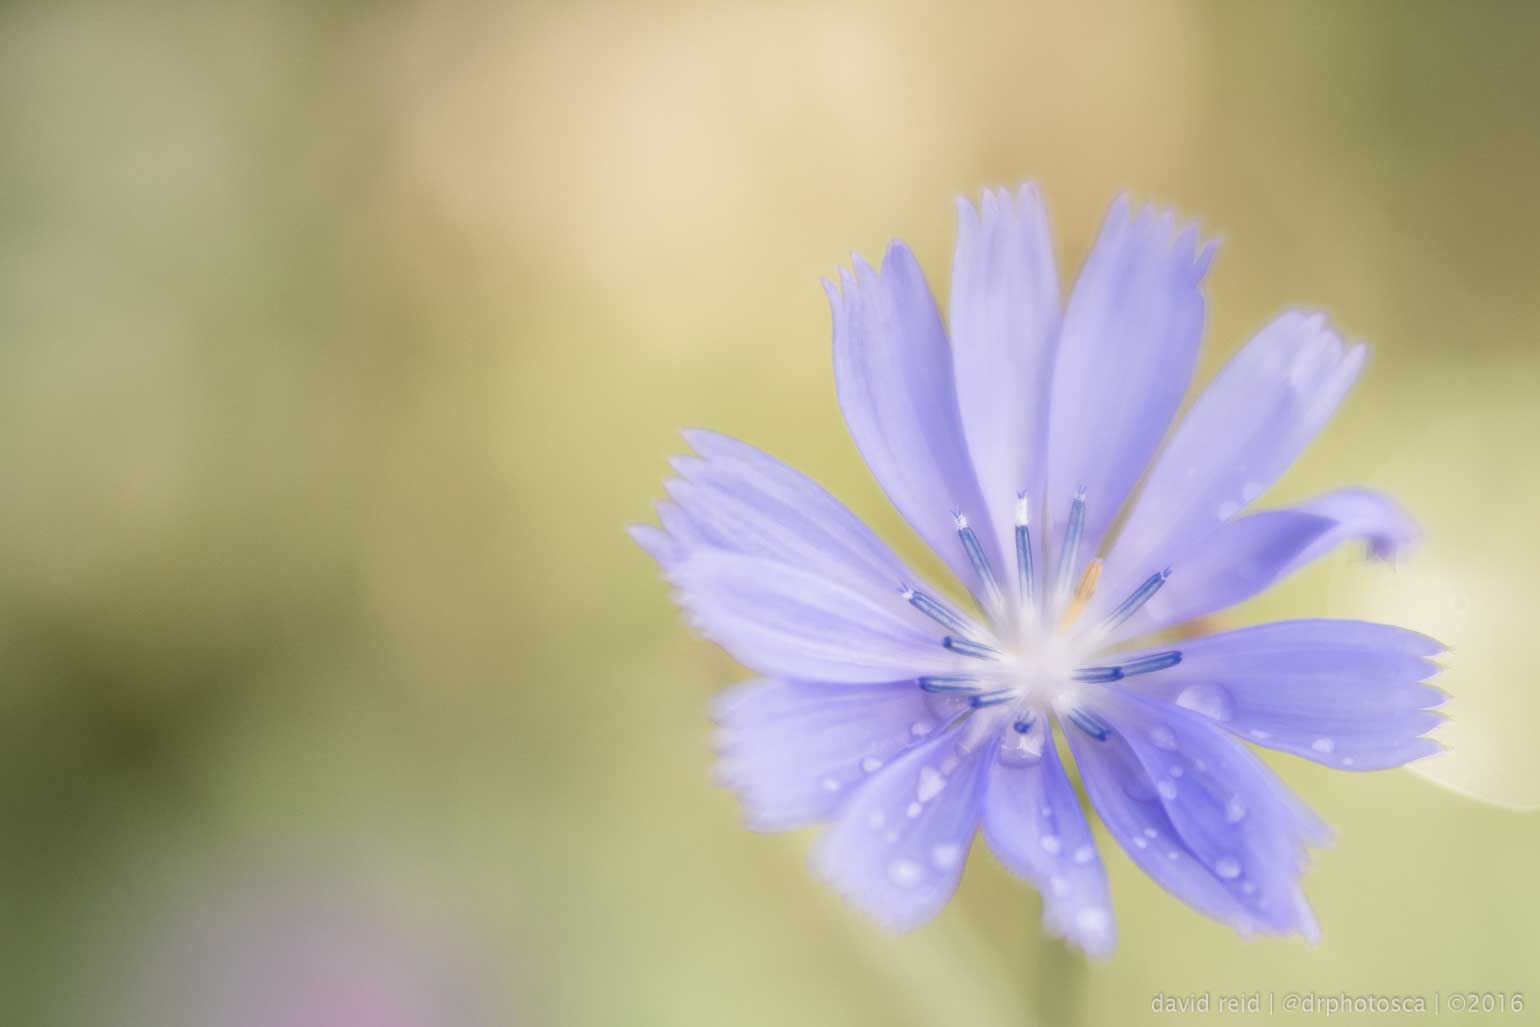 Lensbaby Velvet 56 f/1.6 review and sample photos with soft focus and blur